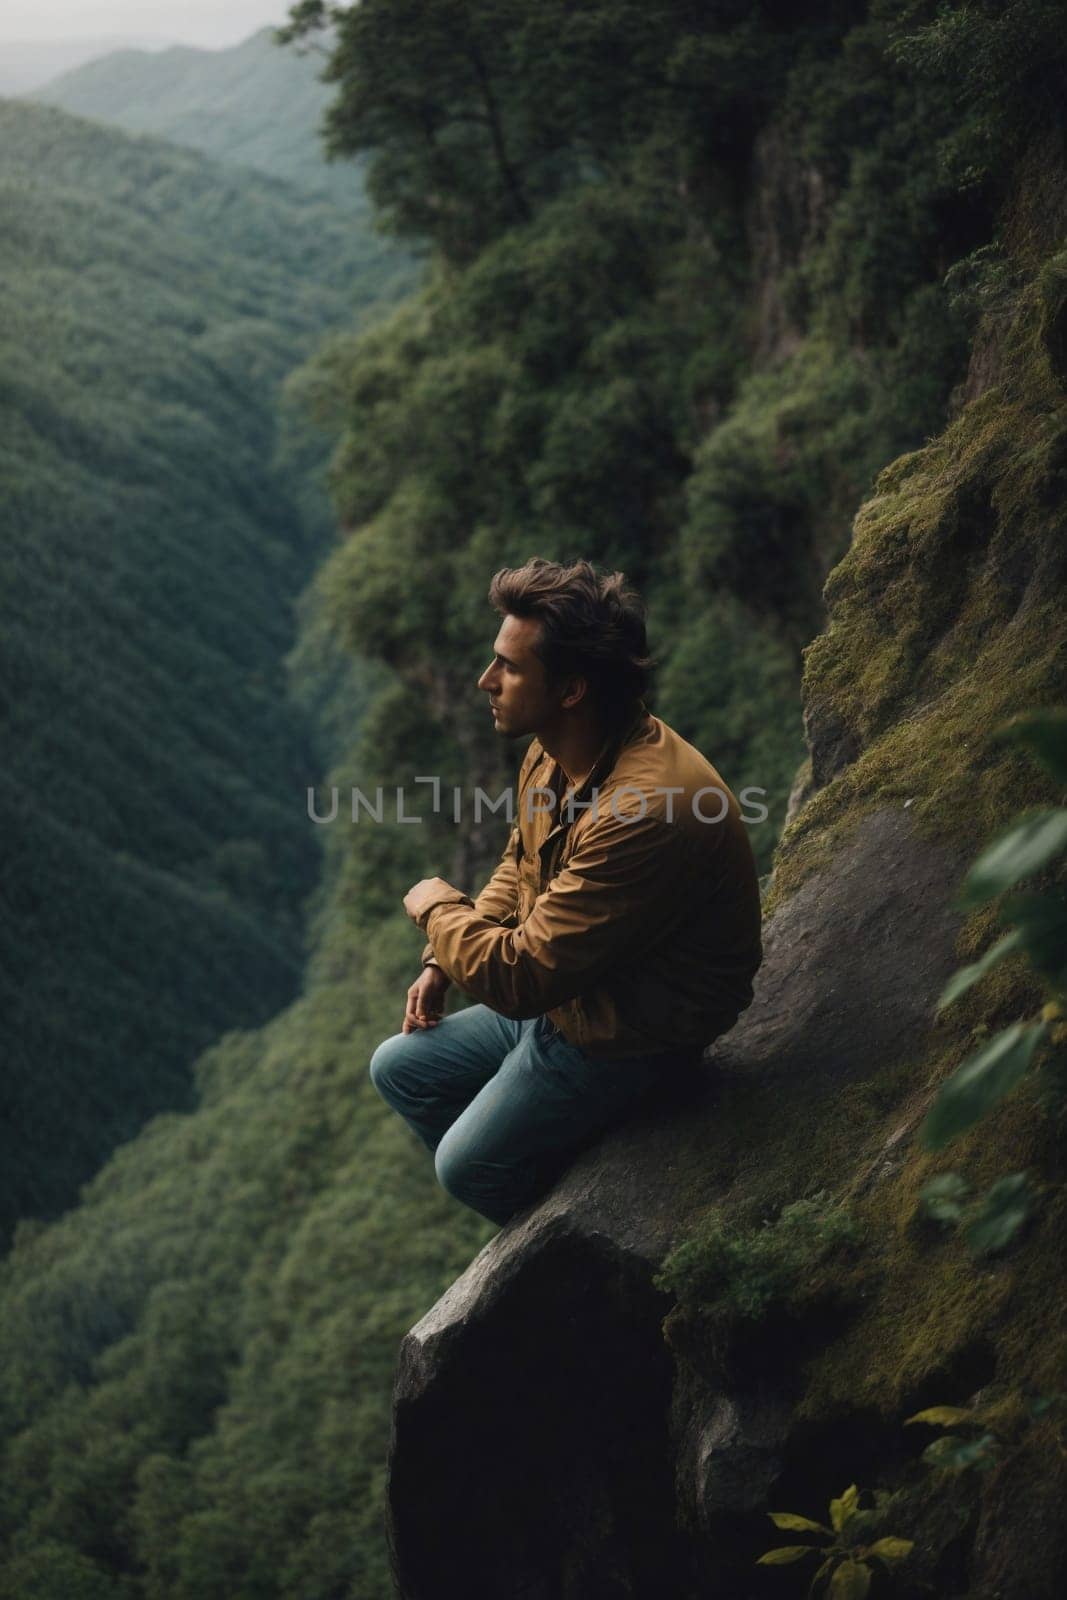 A man enjoys a breathtaking view of nature while sitting on top of a cliff next to a lush forest.